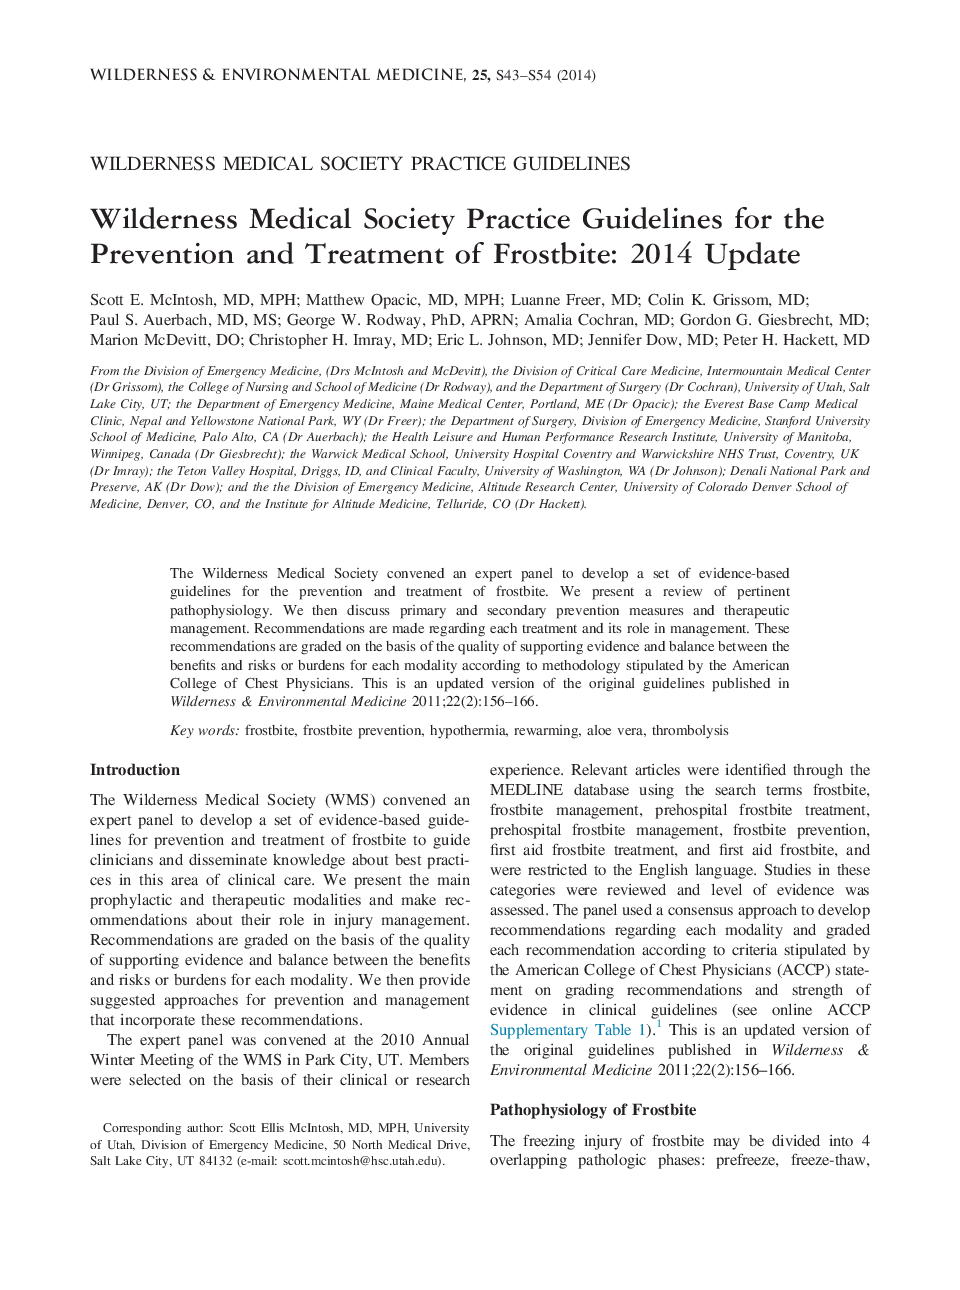 Wilderness Medical Society Practice Guidelines for the Prevention and Treatment of Frostbite: 2014 Update